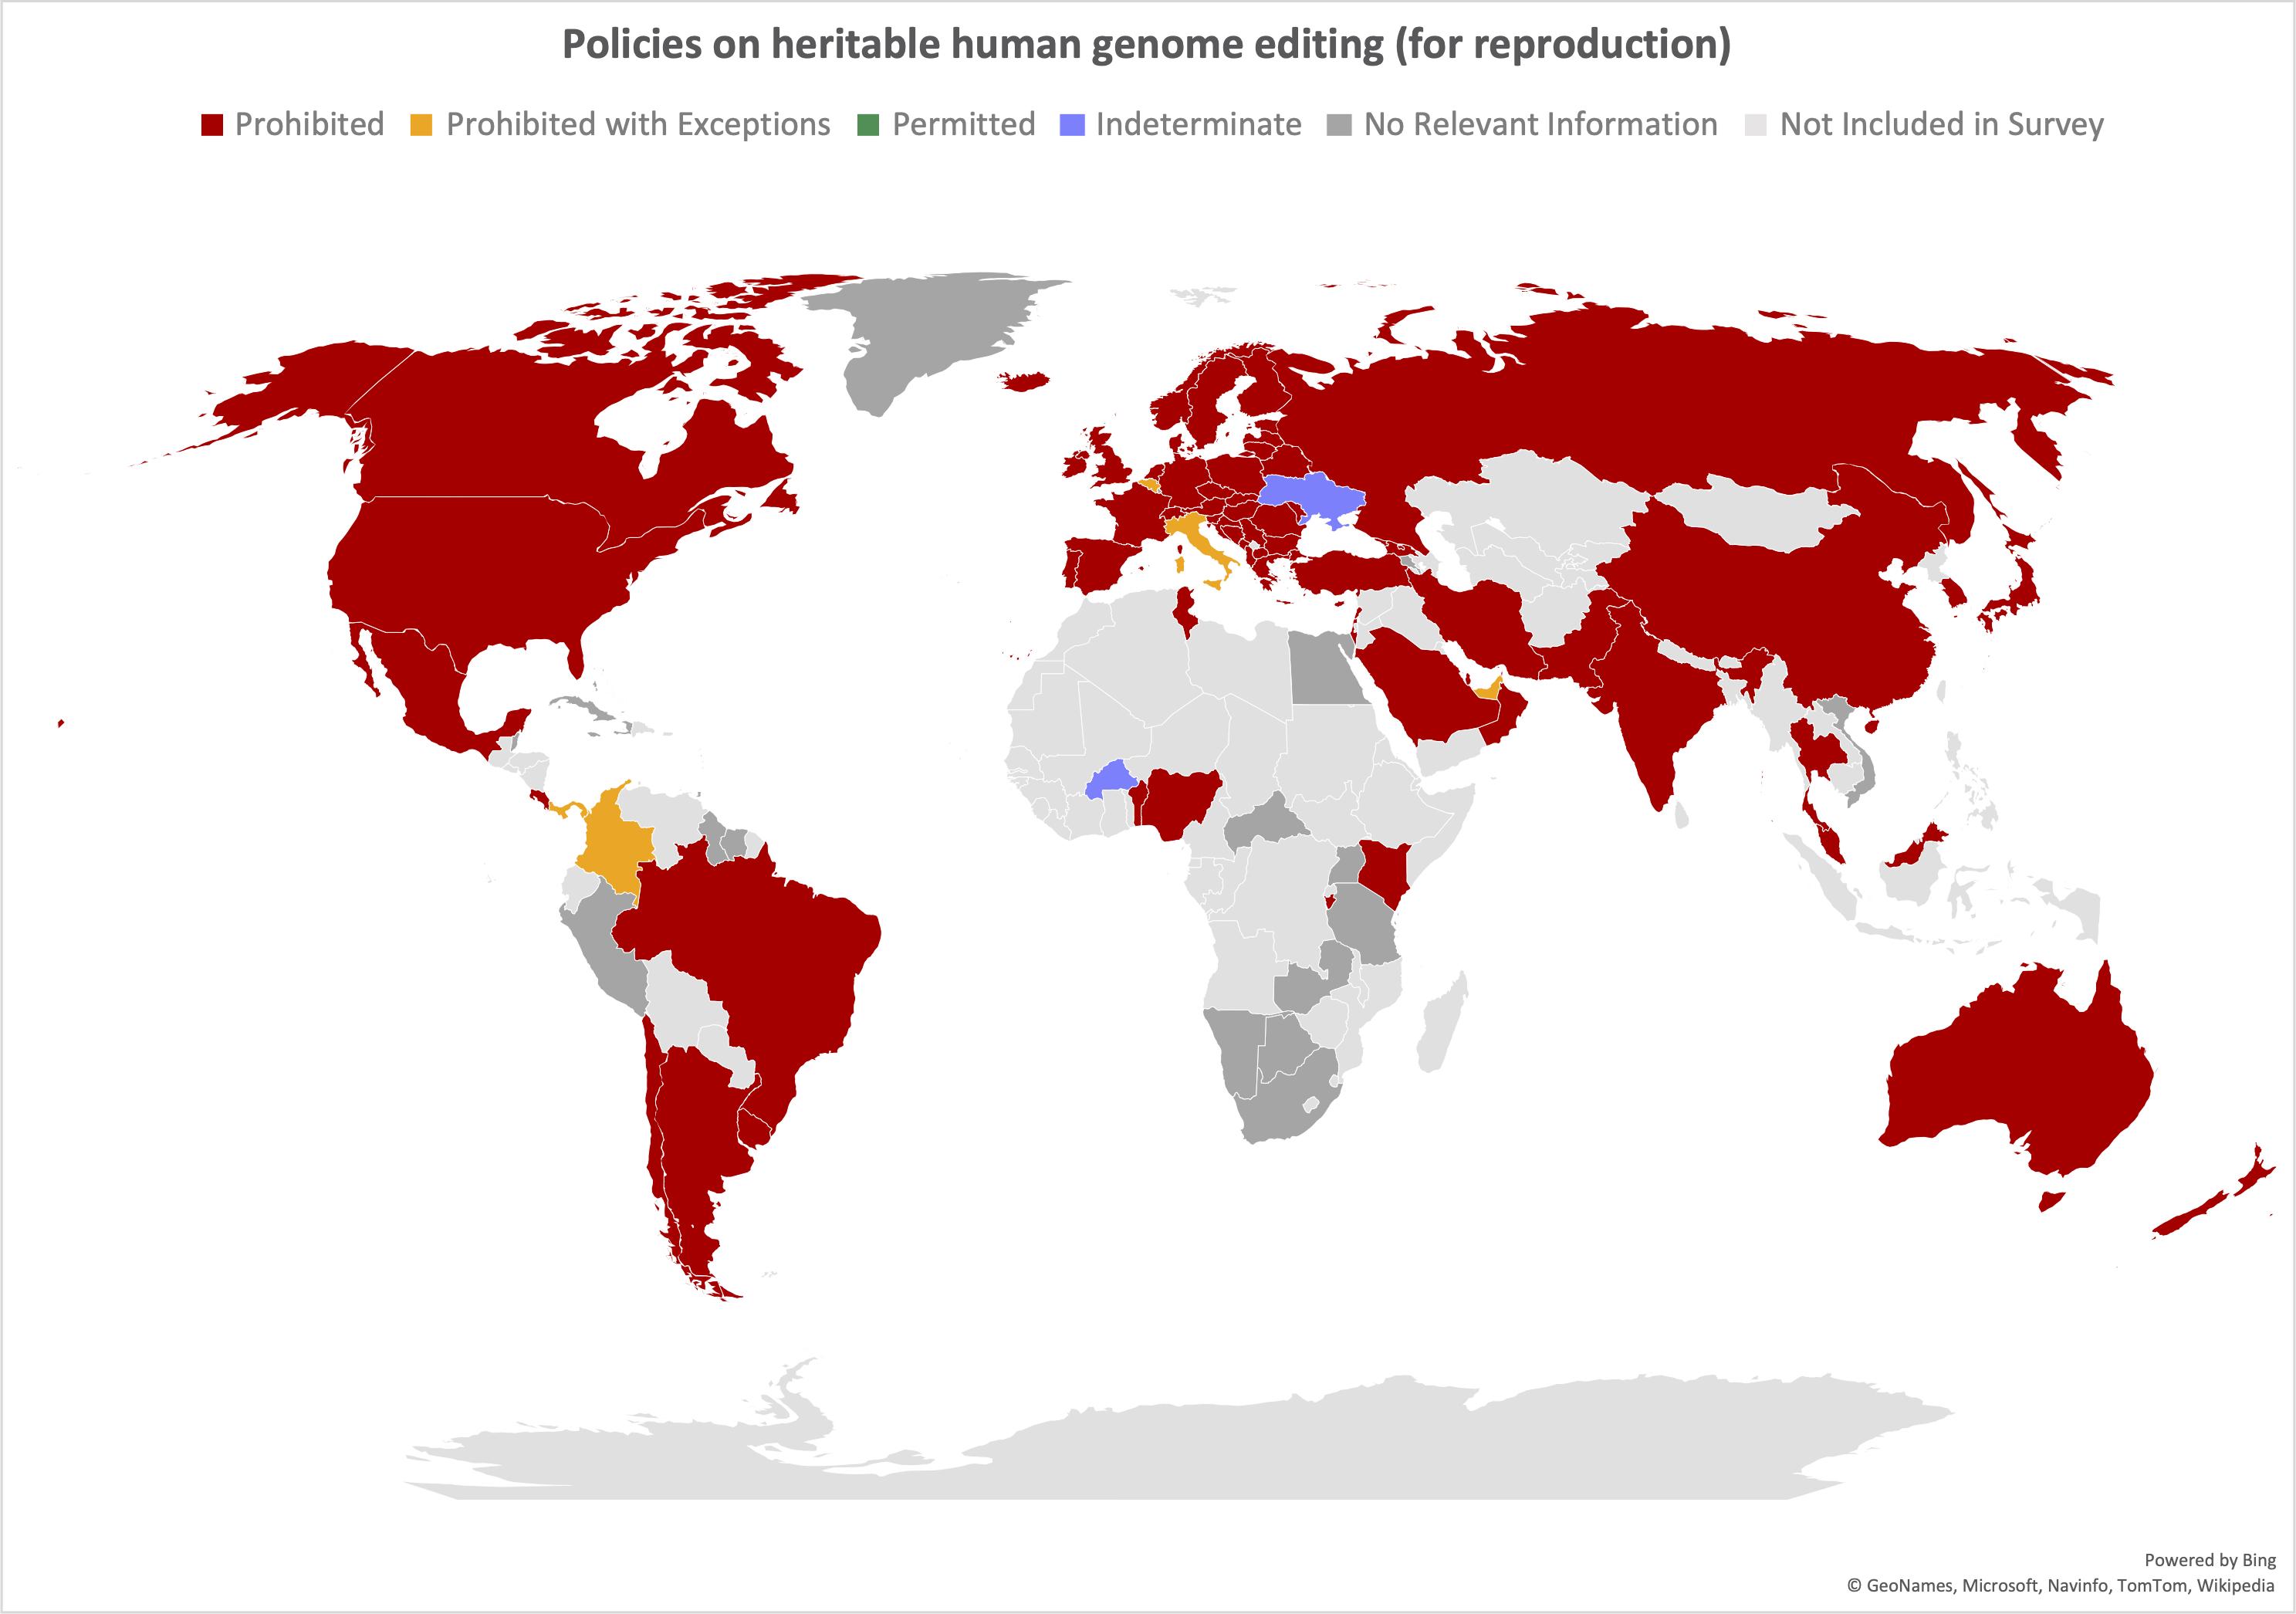 Map of the world showing countries that prohibit heritable human genome editing in red